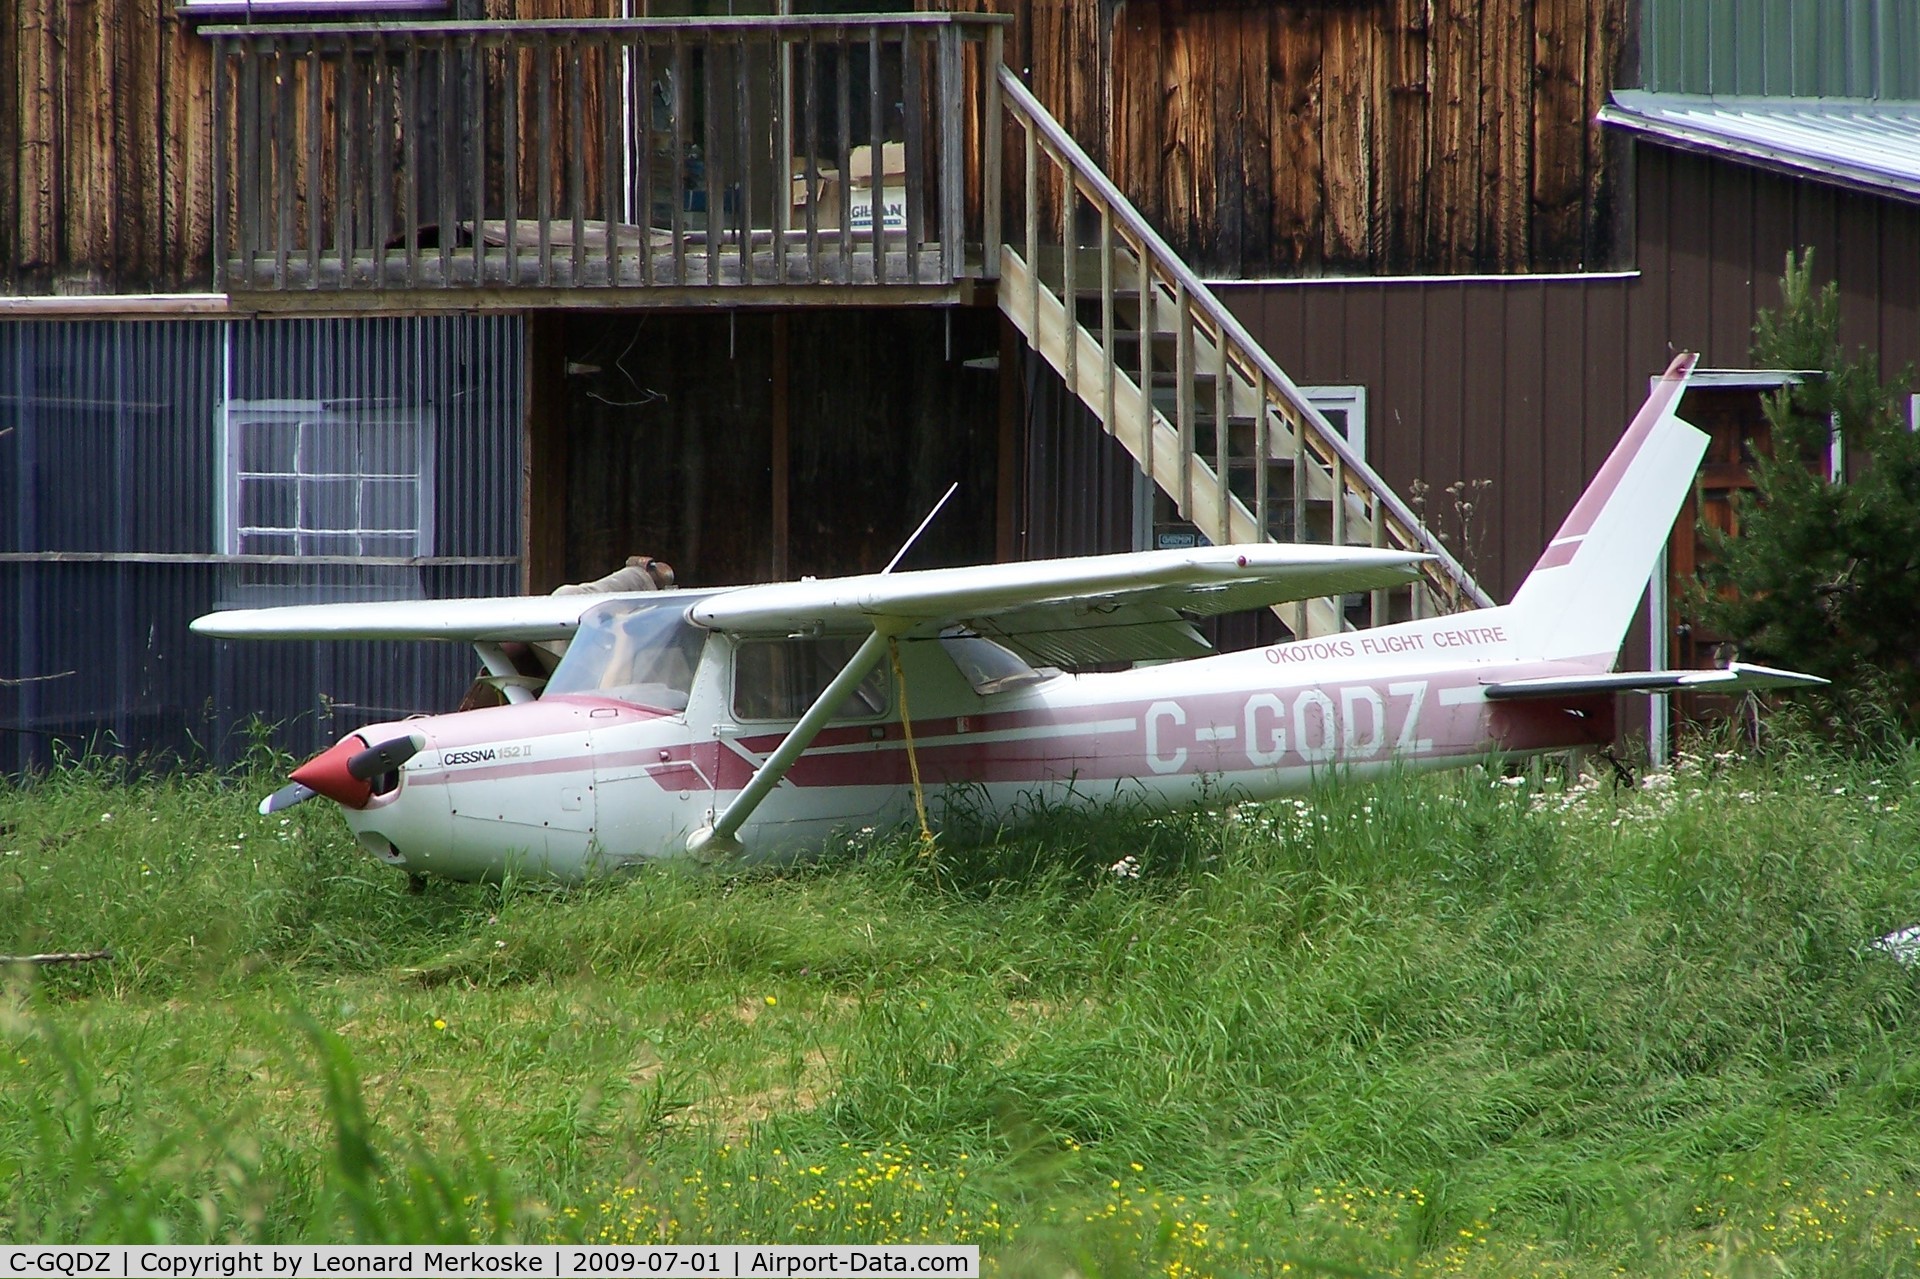 C-GQDZ, 1979 Cessna 152 C/N 15283413, Private airfield at Slate River, ON near Thunder Bay.  The rudder is missing.